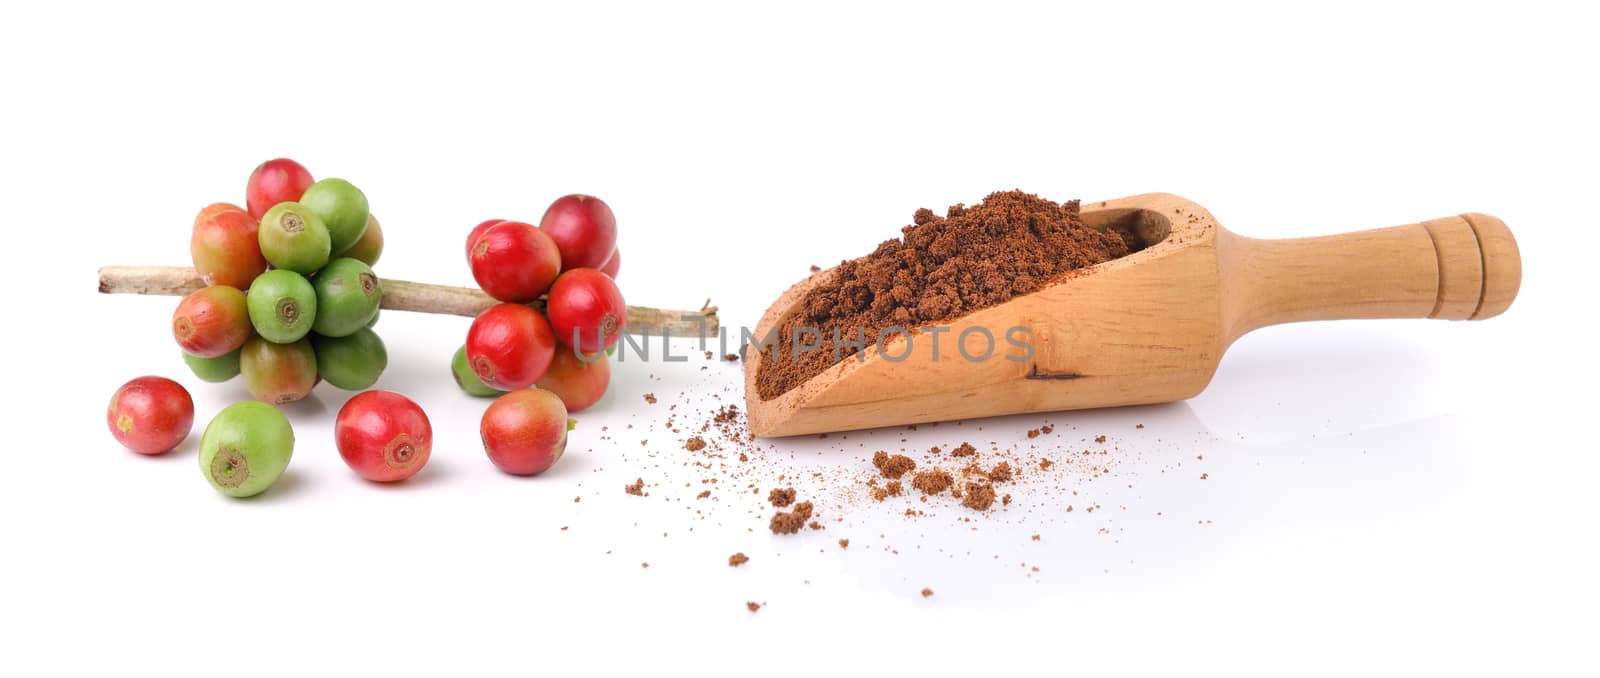 coffee beans and instant coffee in the scoop